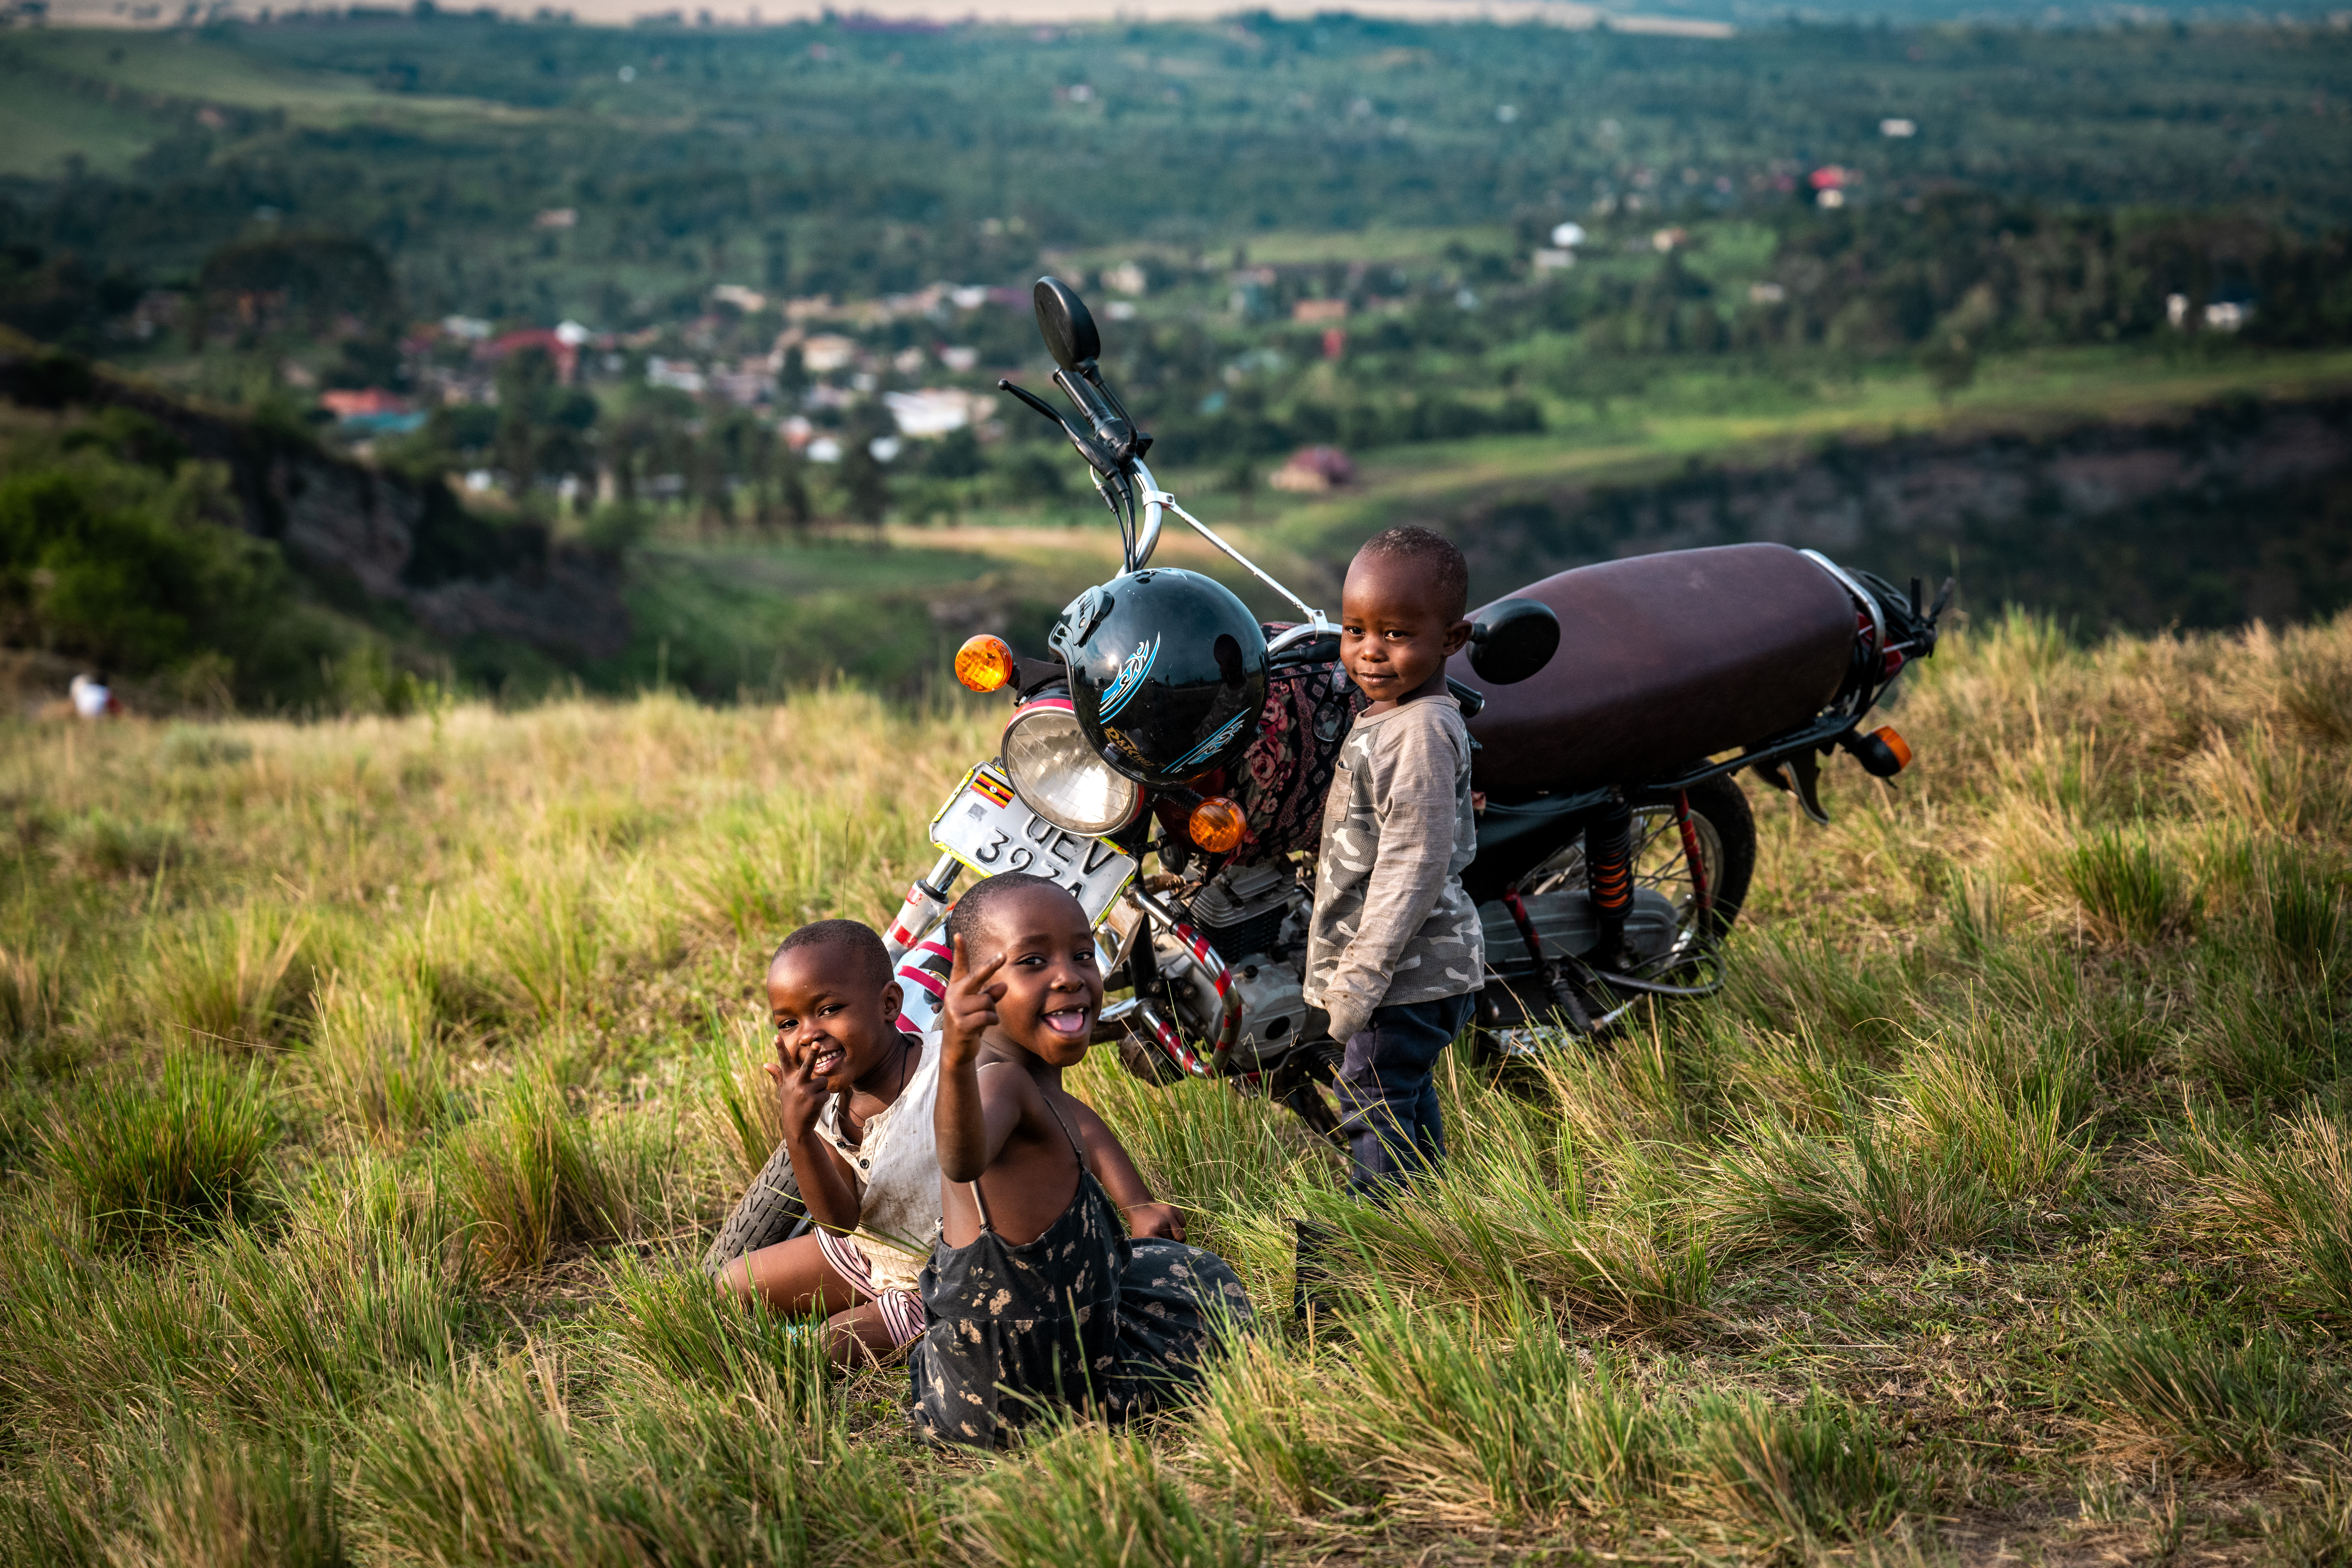 Three Black children on a green hilltop with a motorbike.